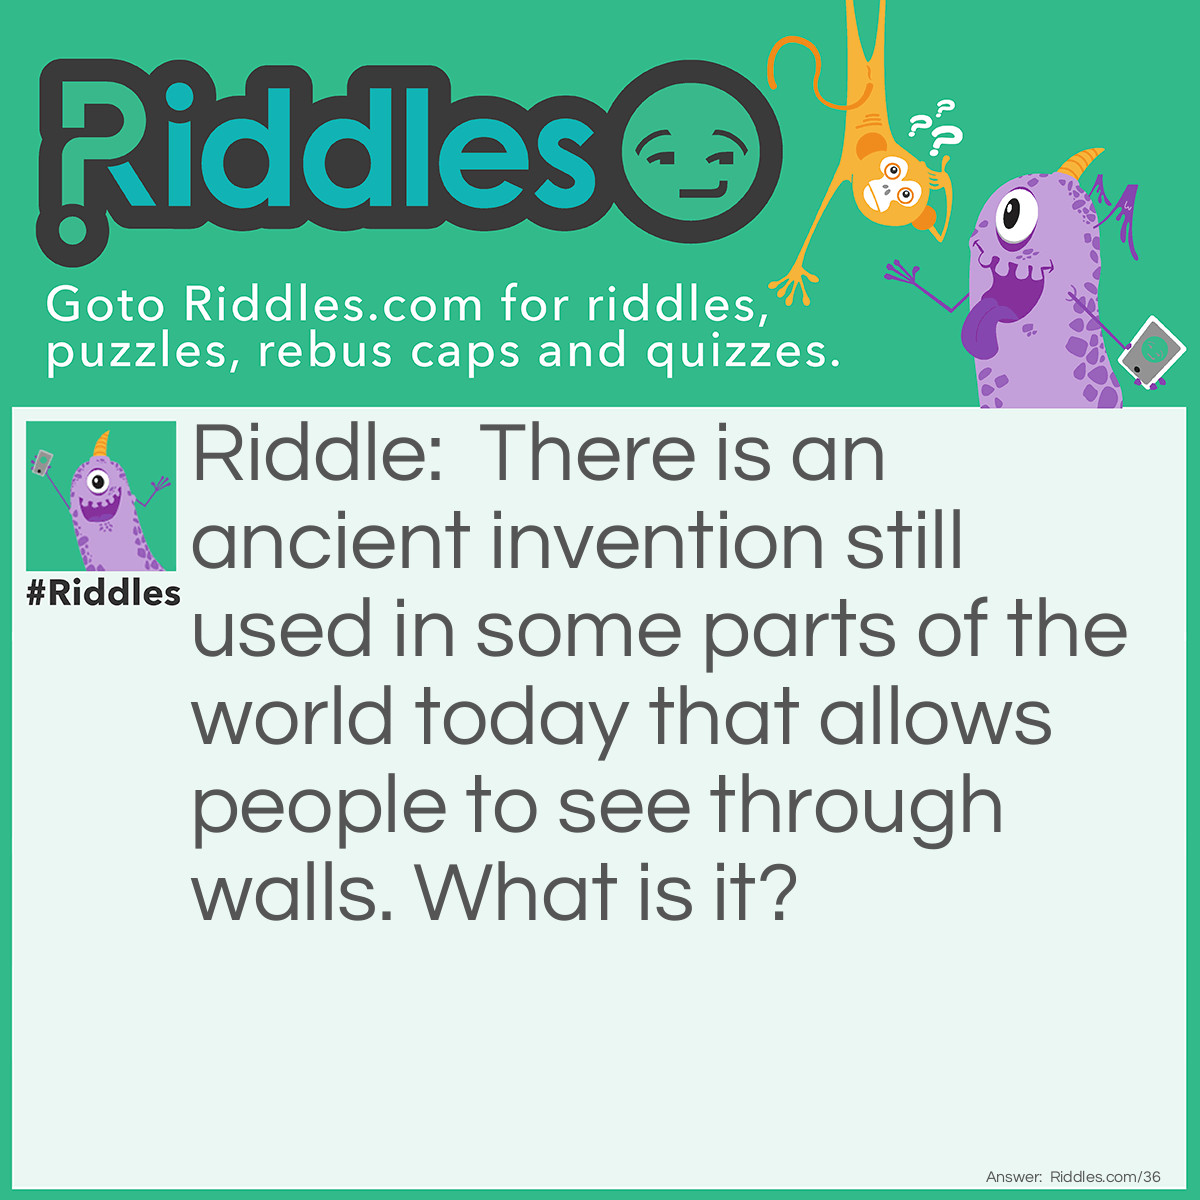 Riddle: There is an ancient invention, still used in some parts of the world today, that allows people to see through walls. What is it? Answer: A window.